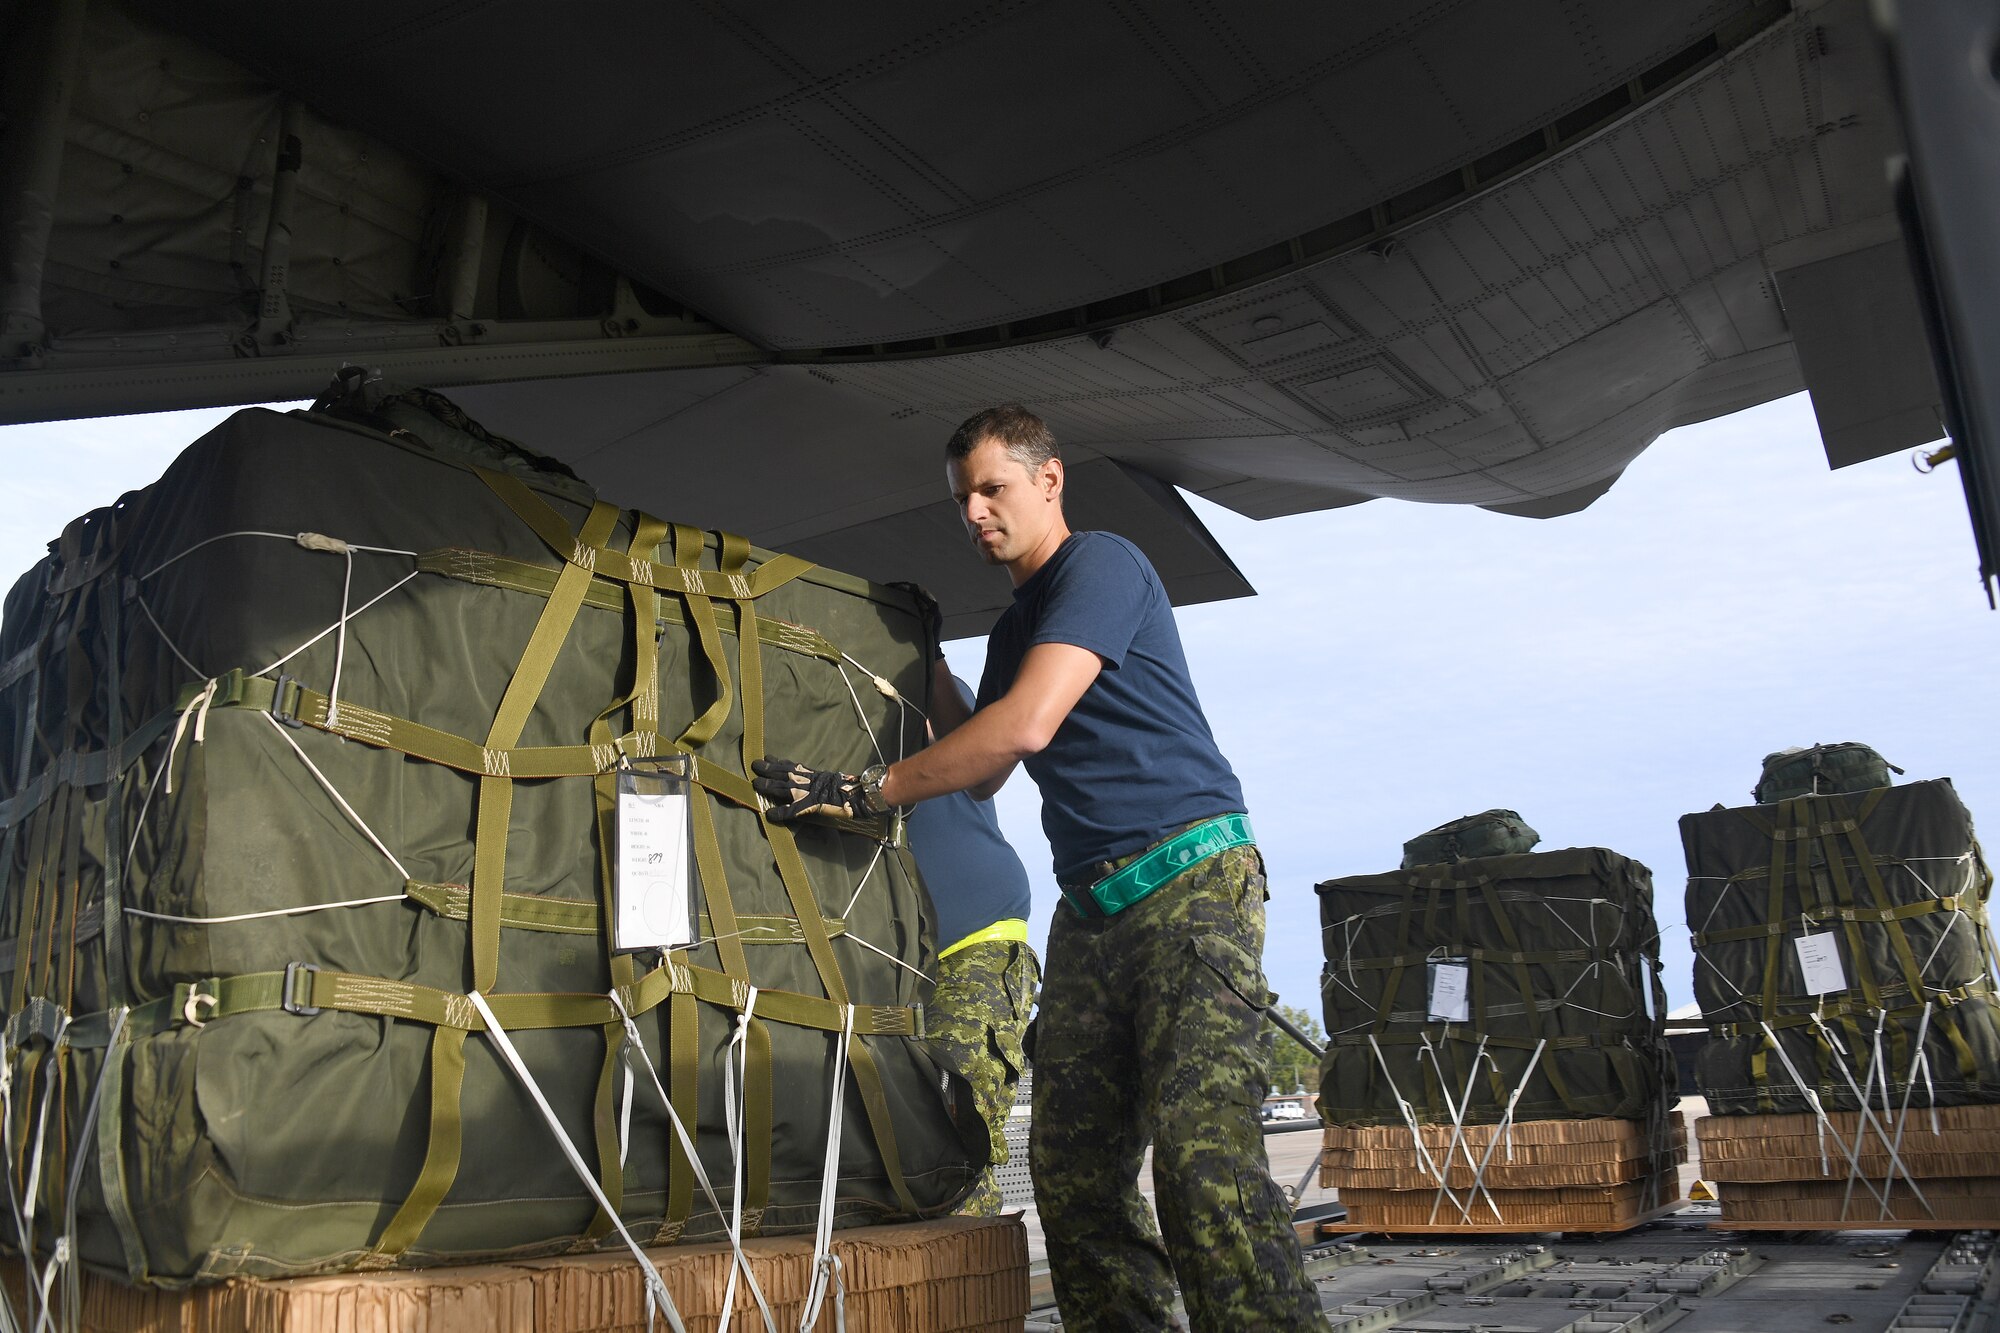 Royal Canadian Air Force loadmasters push cargo onto a C-130 aircraft during exercise Green Flag Little Rock, Oct. 24, 2019, Alexandria International Airport, Louisiana. The exercise also gave Airmen a unique opportunity to enhance partnerships with joint and allied partners. (U.S. Air Force photo by Tech. Sgt. Liliana Moreno)